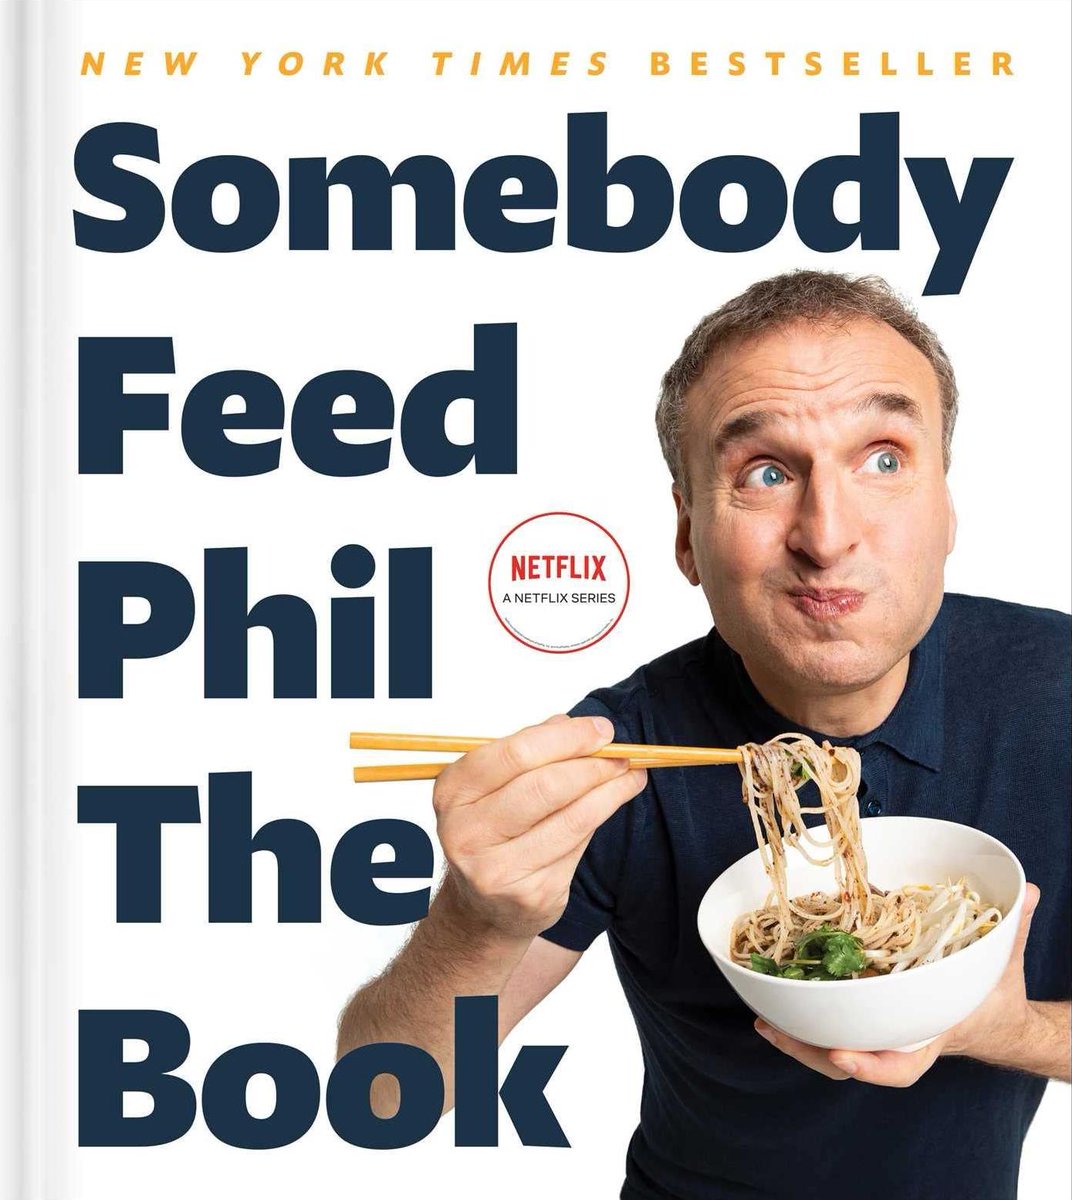 Somebody Feed Phil the Book: Untold Stories, Behind-the-Scenes Photos and Favorite Recipes: A Cookbo HOJX1II

amazon.com/dp/1982170999?…

#stvm #weargloves #fact #winner #homepod #bluejeans #patrick #nextgeneration #cat #theatre #vikings #followers #woodlyn #nutrition